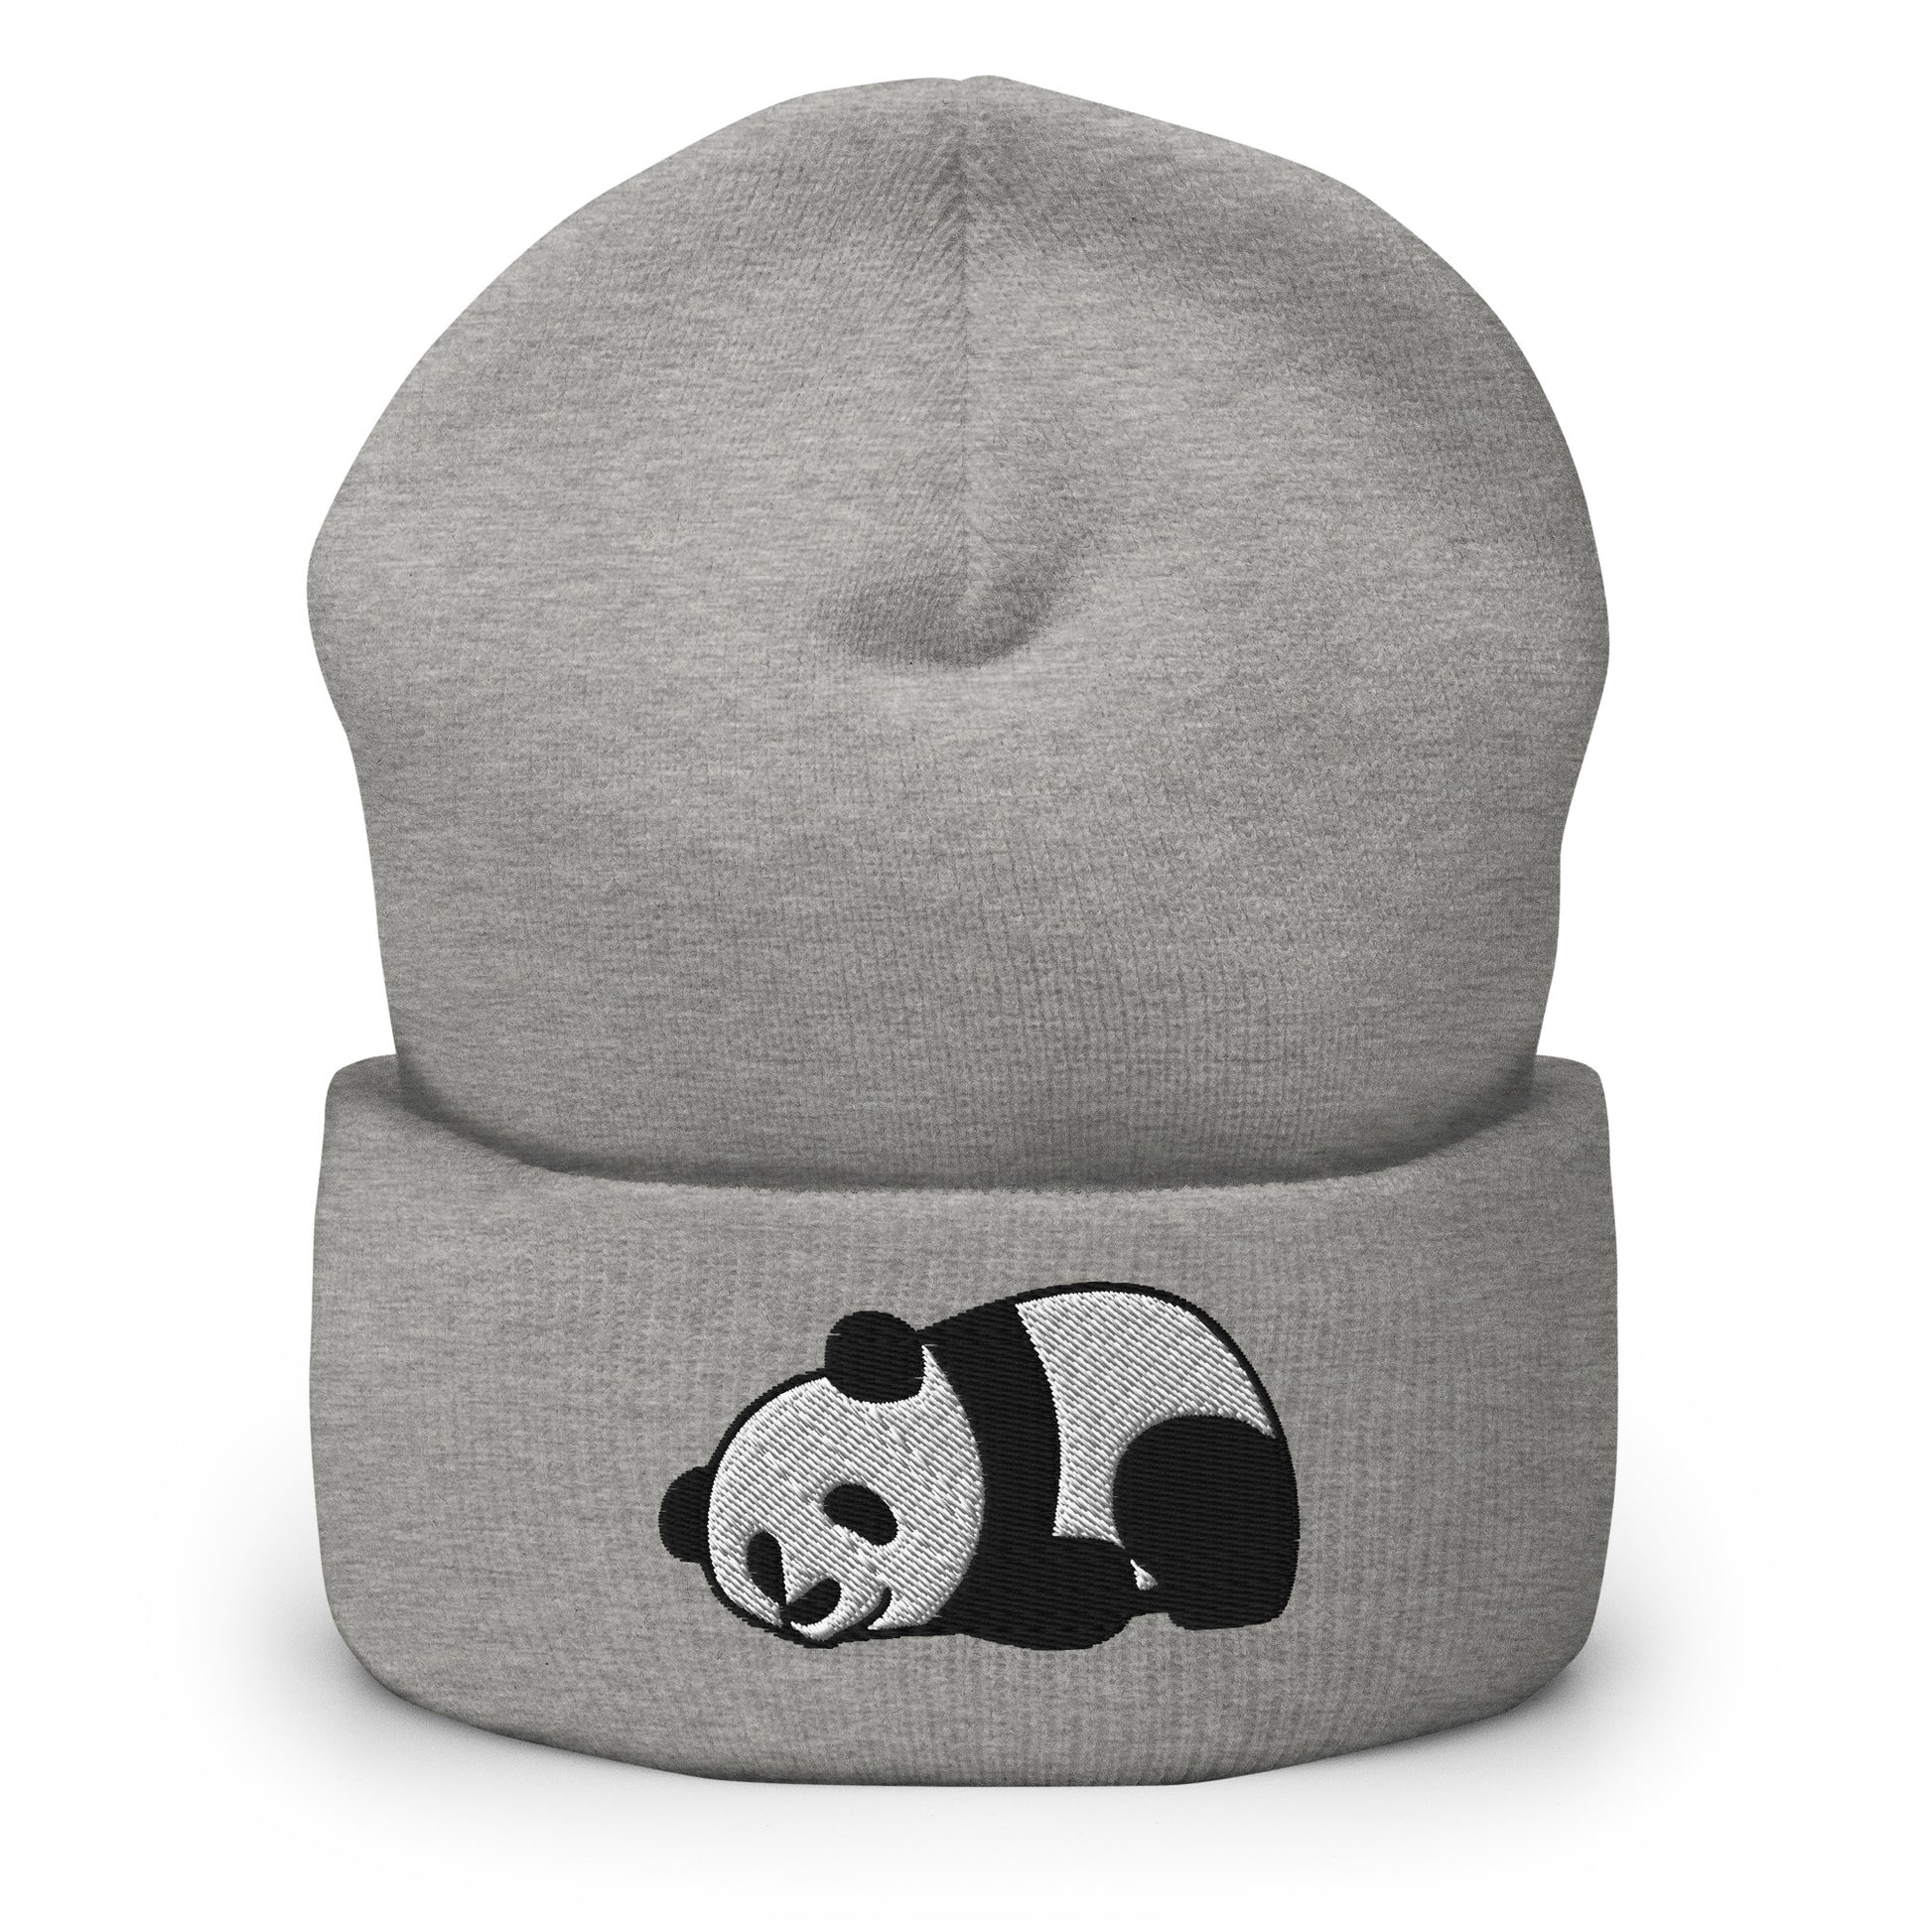 Sleepy Panda Bear Embroidered Cuffed Beanie, Black White Embroidery Party Men Women Stretchy Winter Adult Aesthetic Cap Hat Gift Starcove Fashion